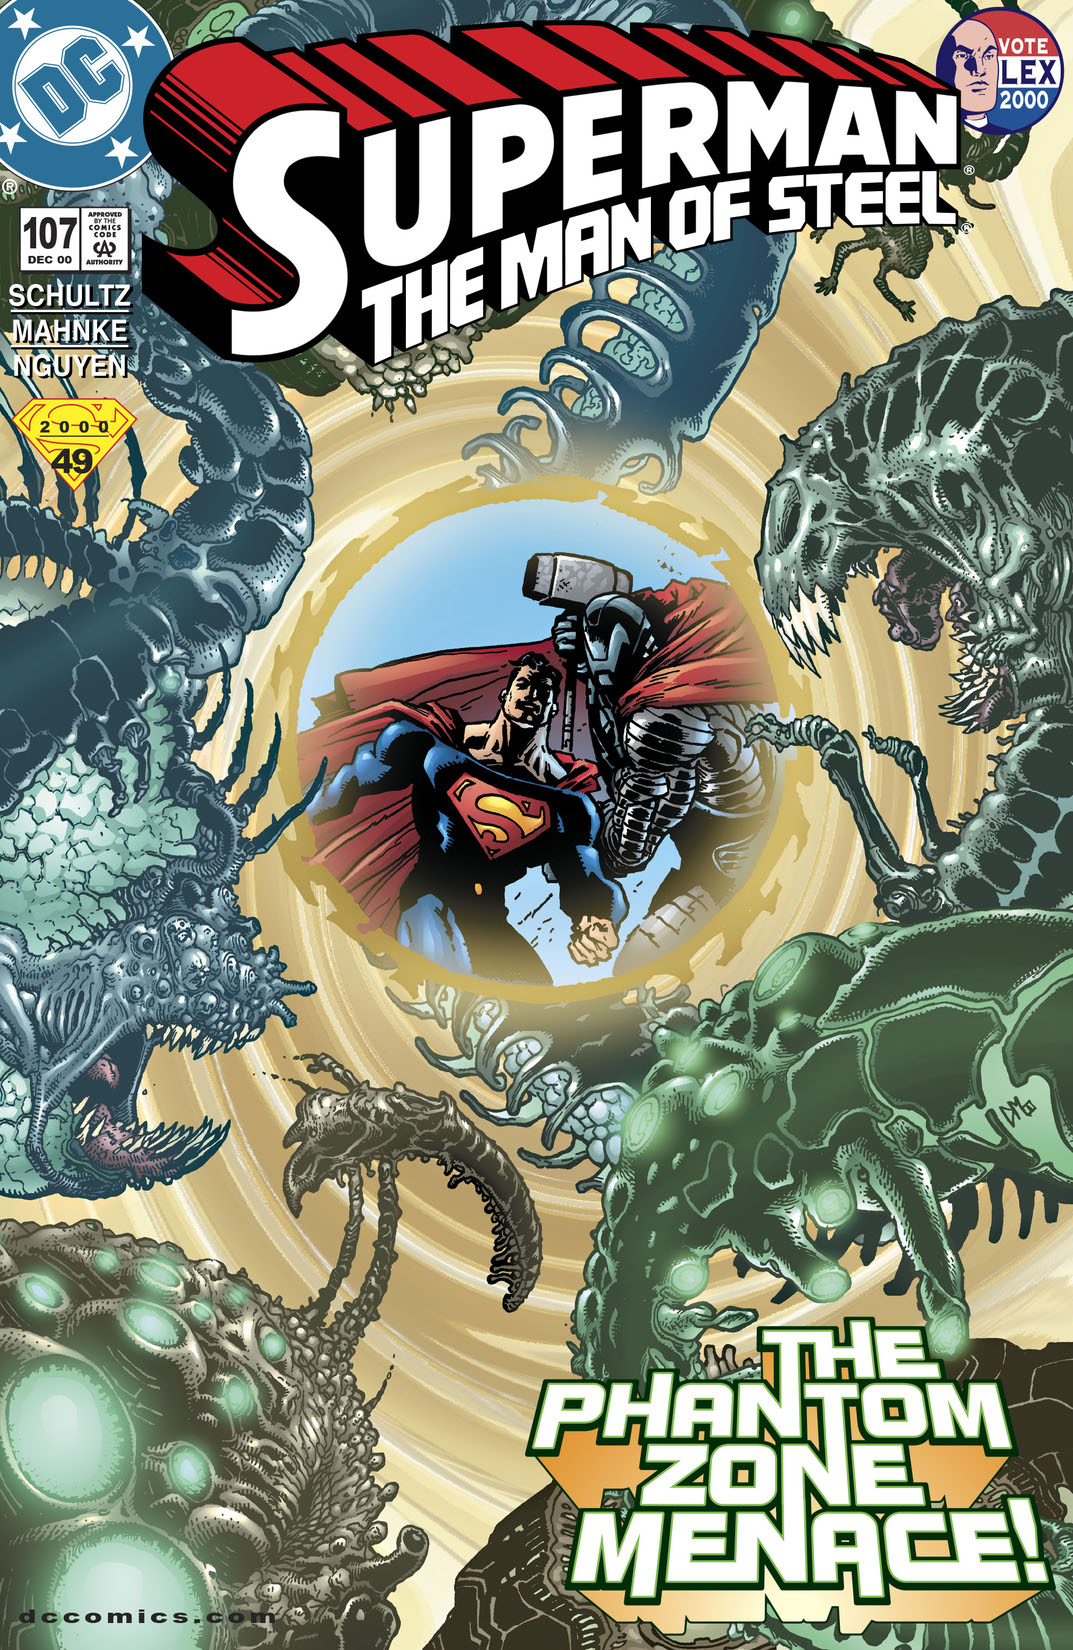 Superman: The Man of Steel #107 preview images